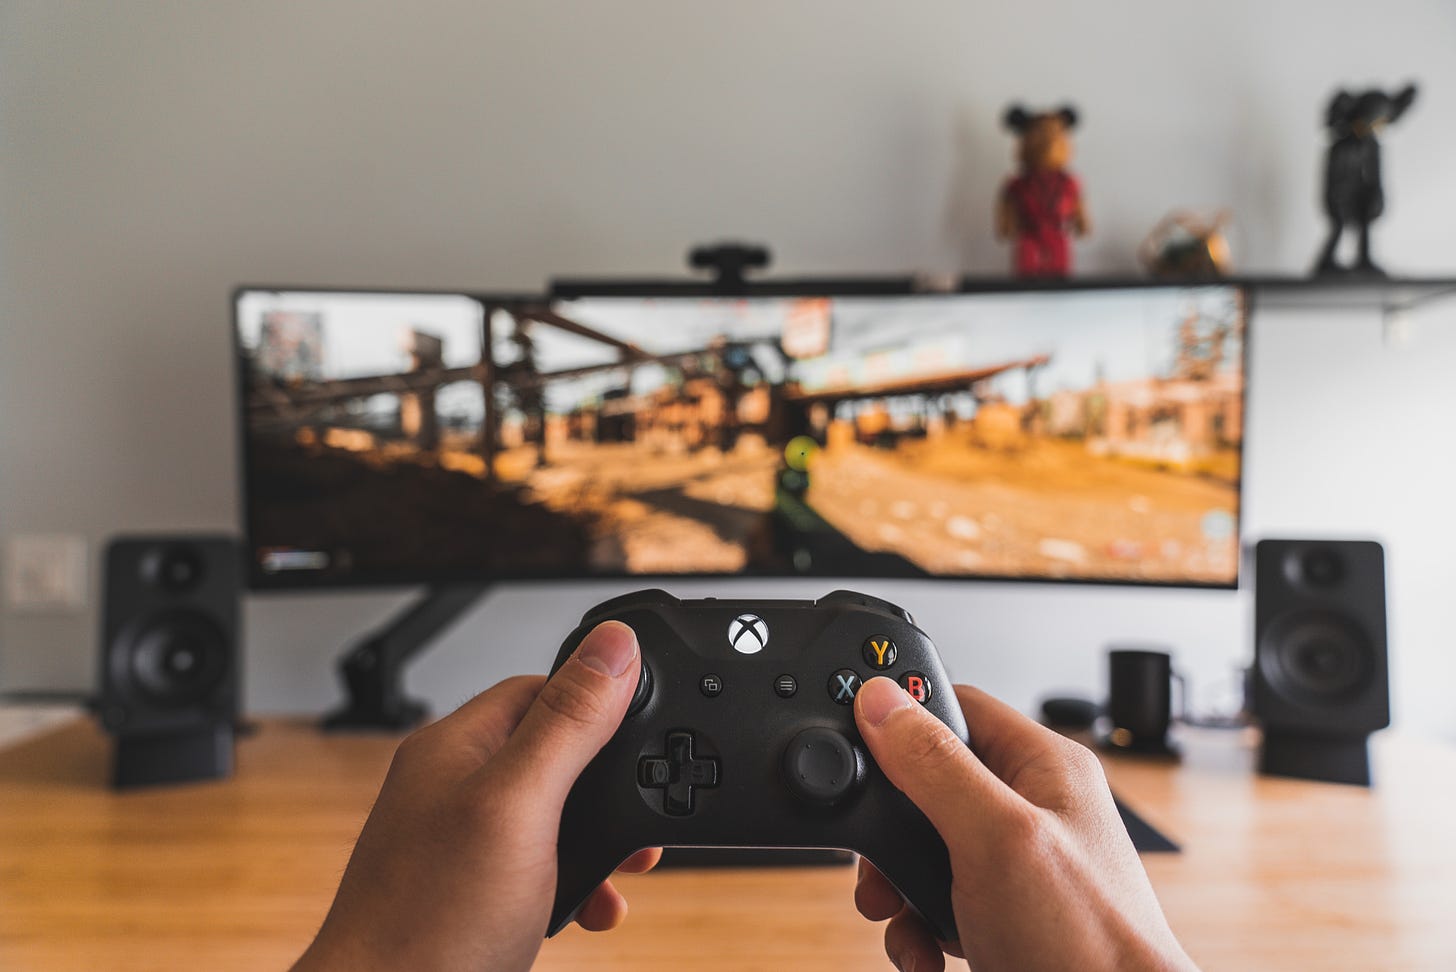 Hands holding a gaming controller towards a desk, monitor, speakers and a shelf